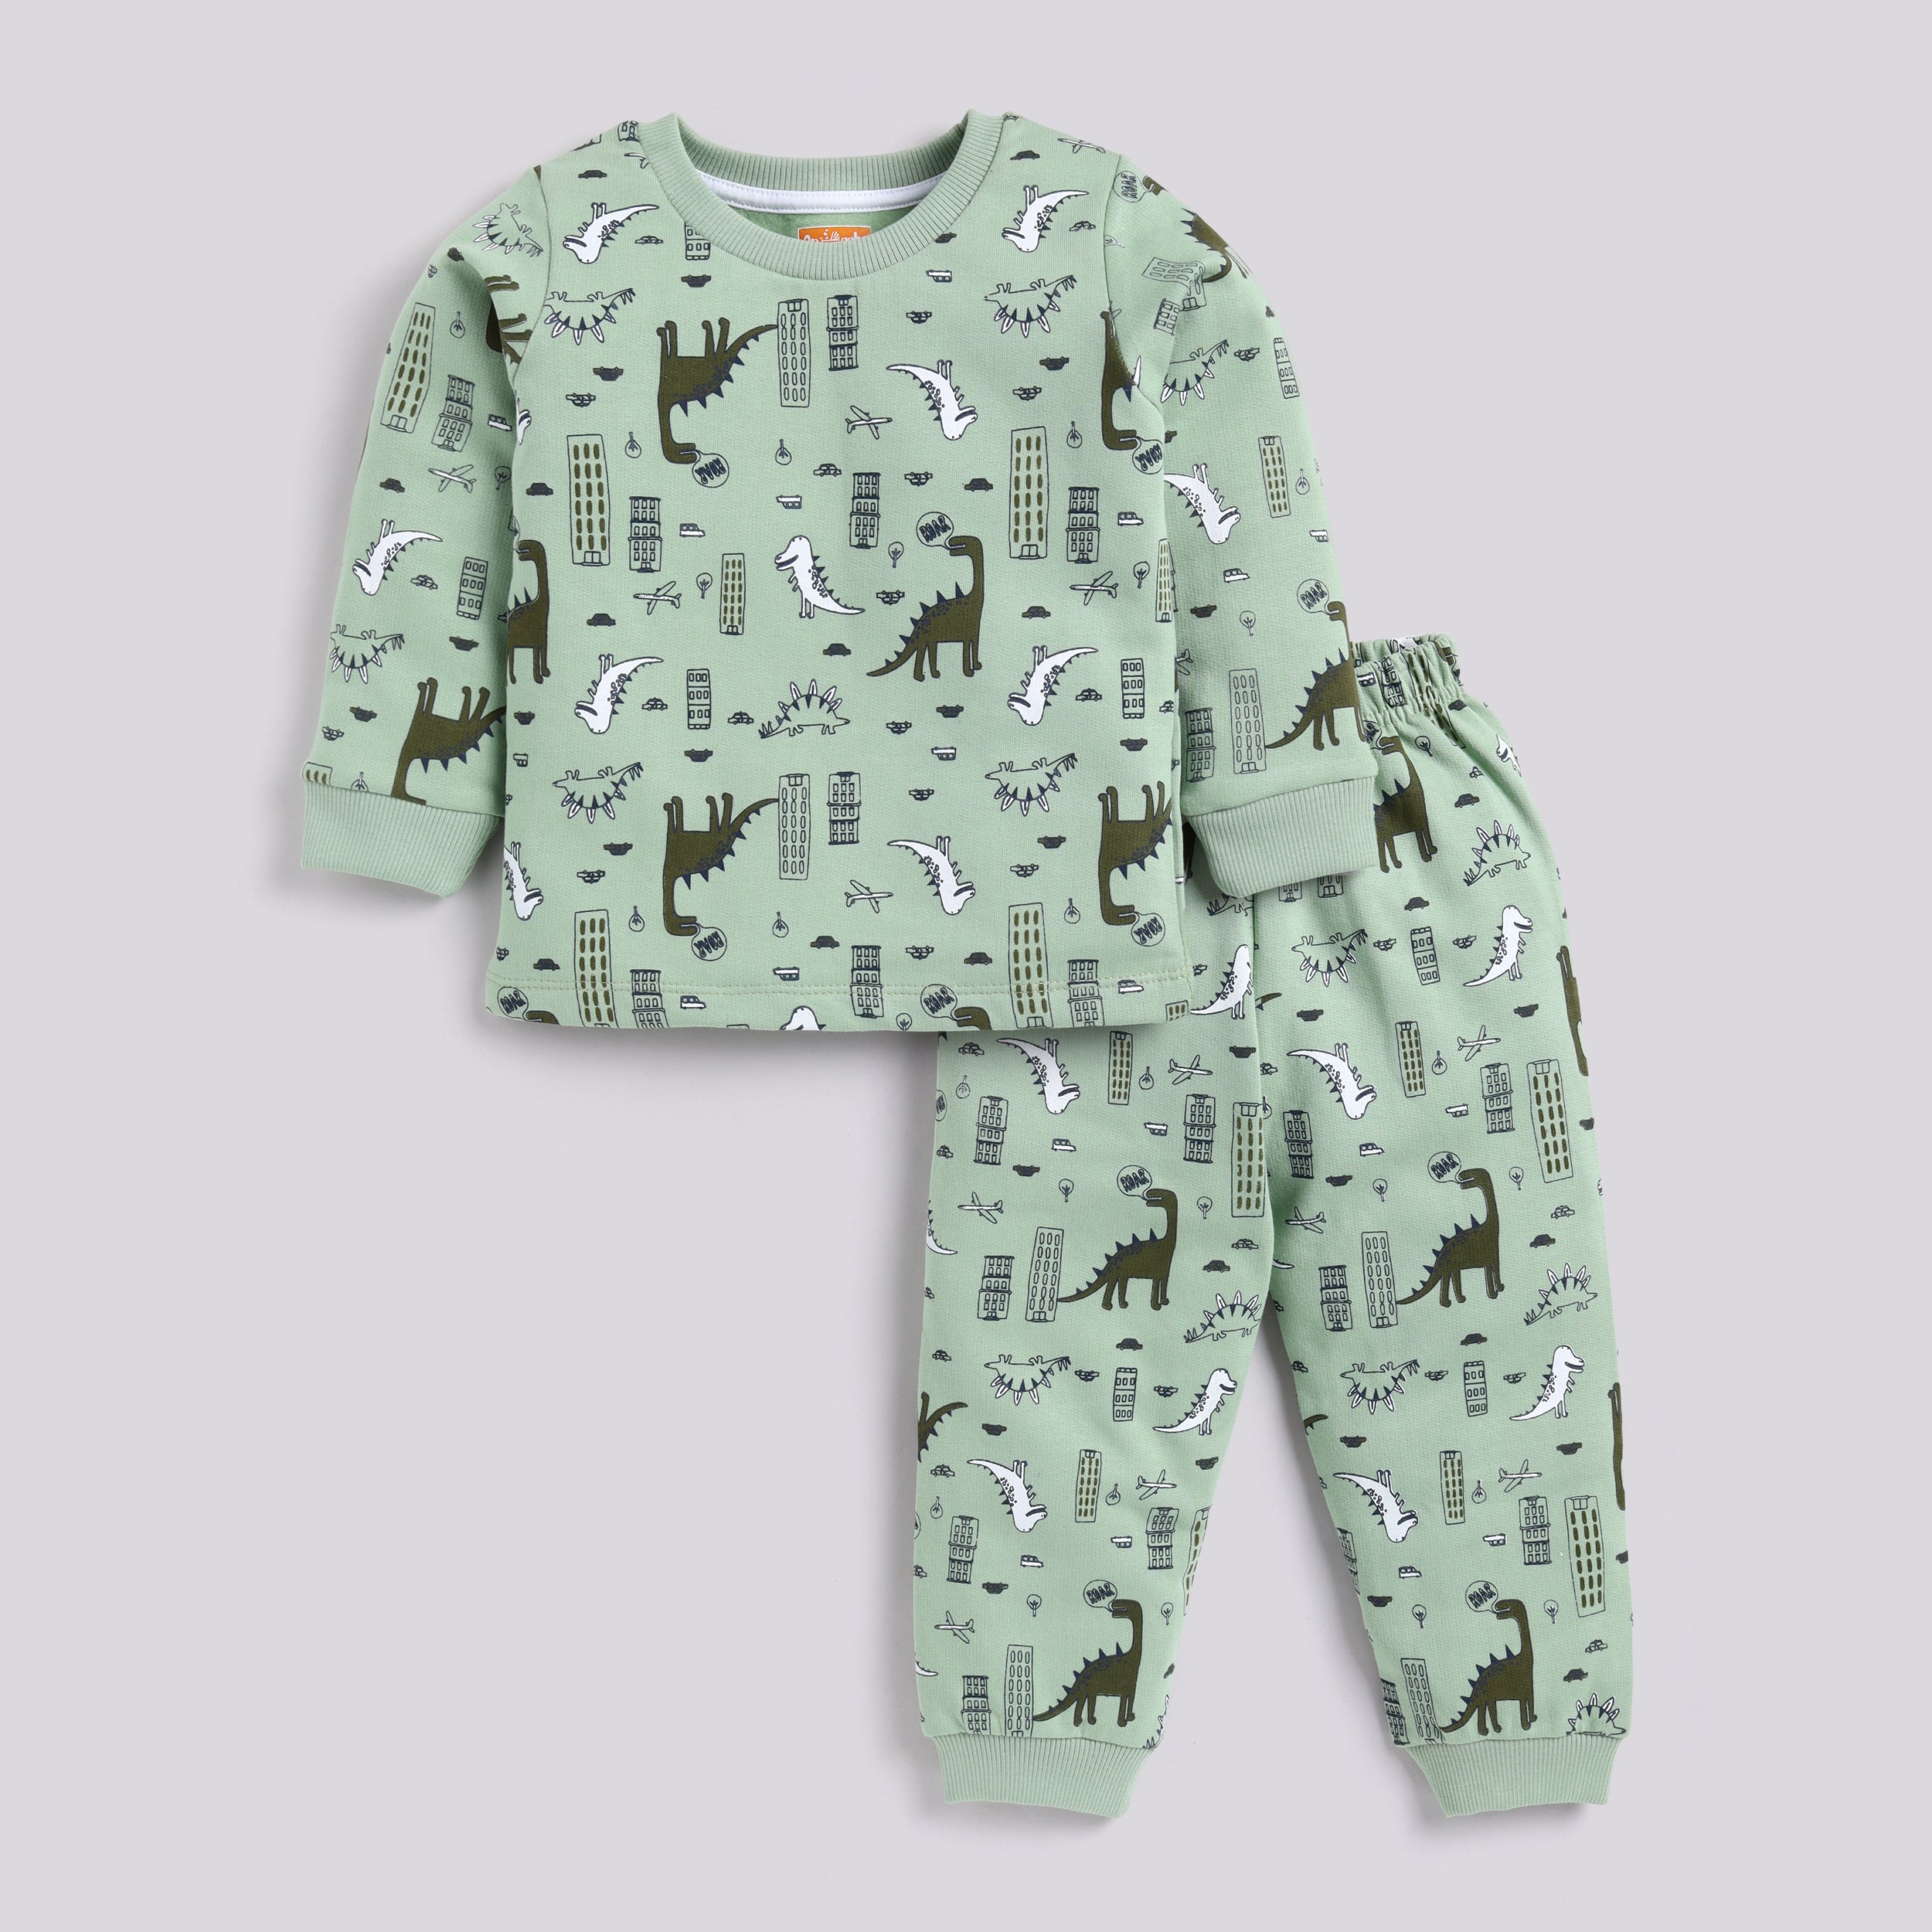 Snuggly Monkey Dino Aop Full-Sleeves Sweat Shirt With Joggers